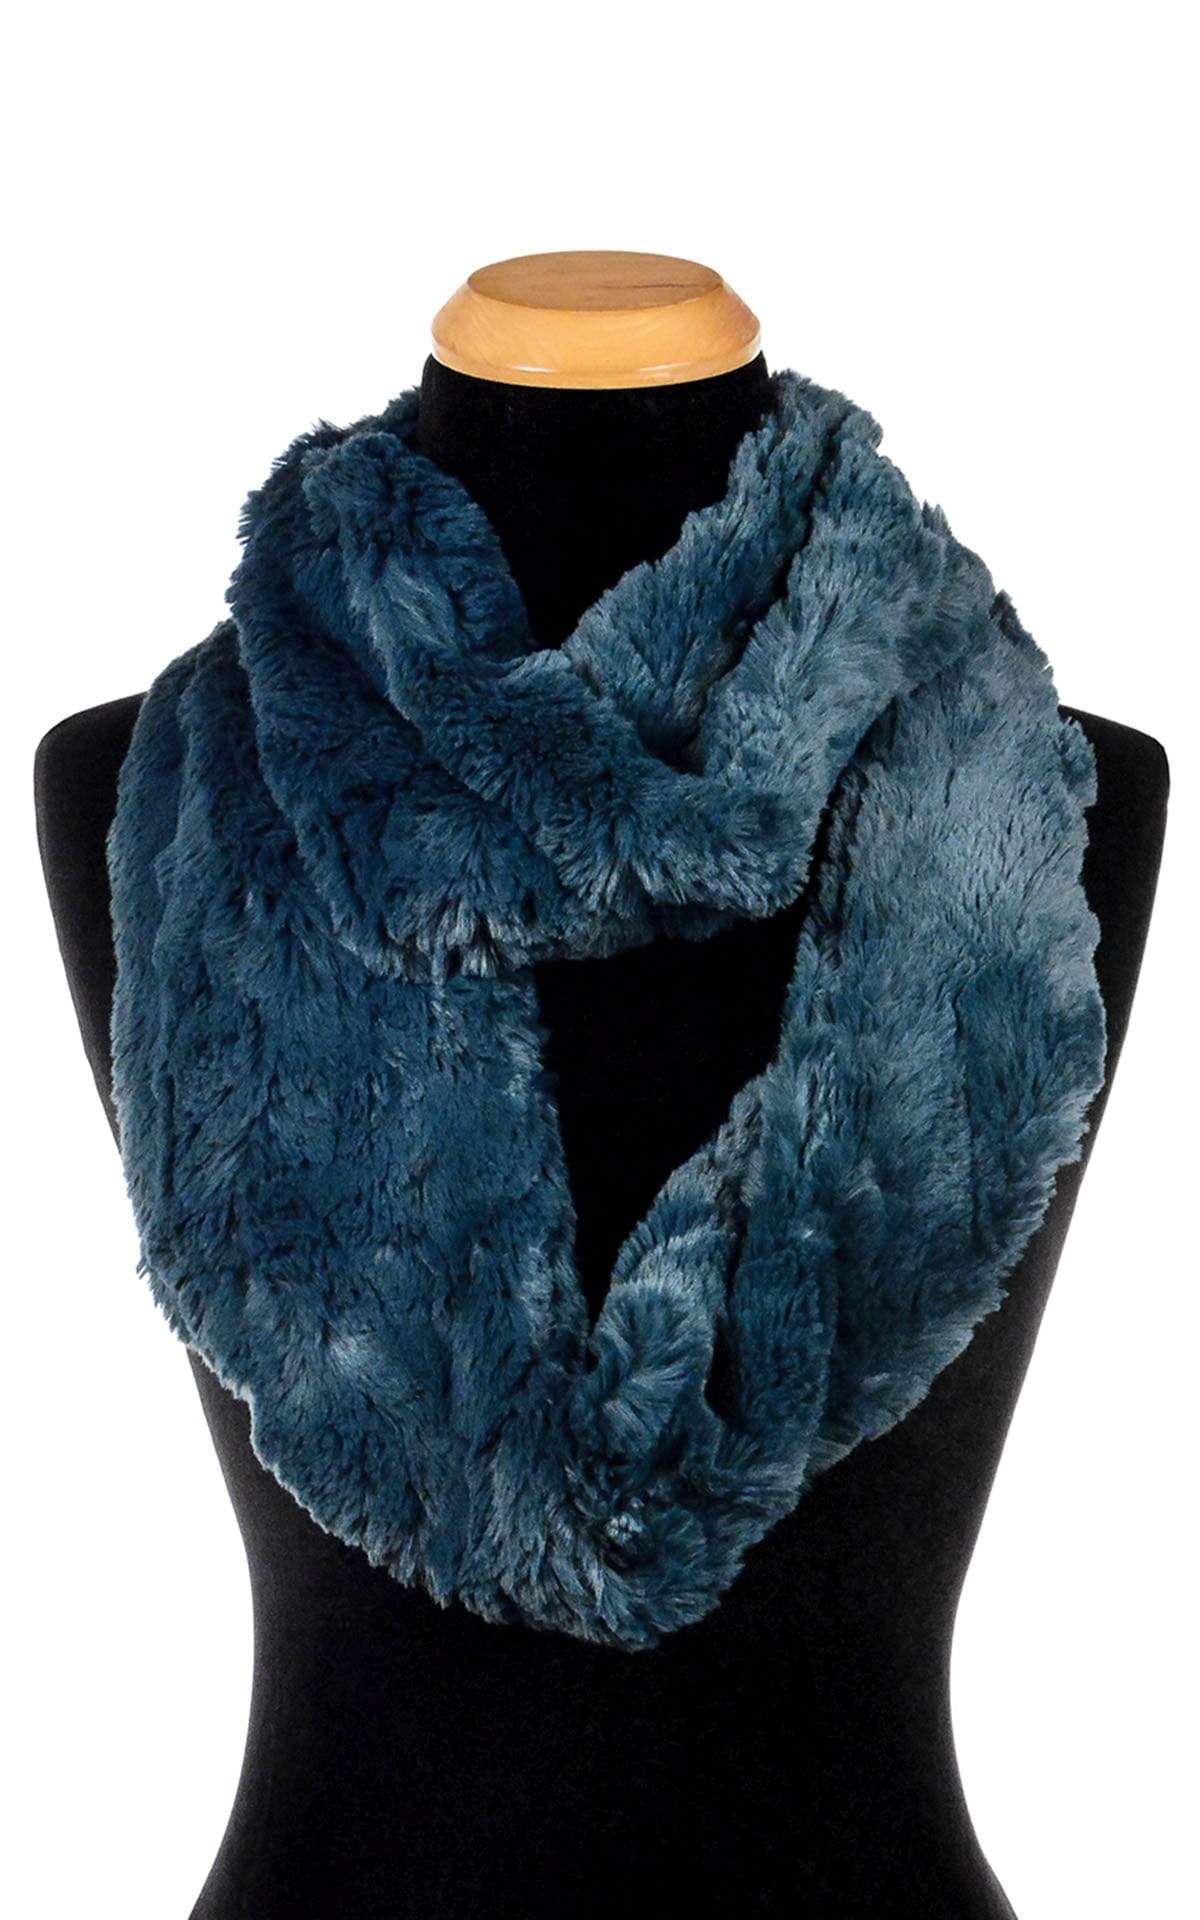 Infinity Scarf - Luxury Faux Fur In Peacock Pond